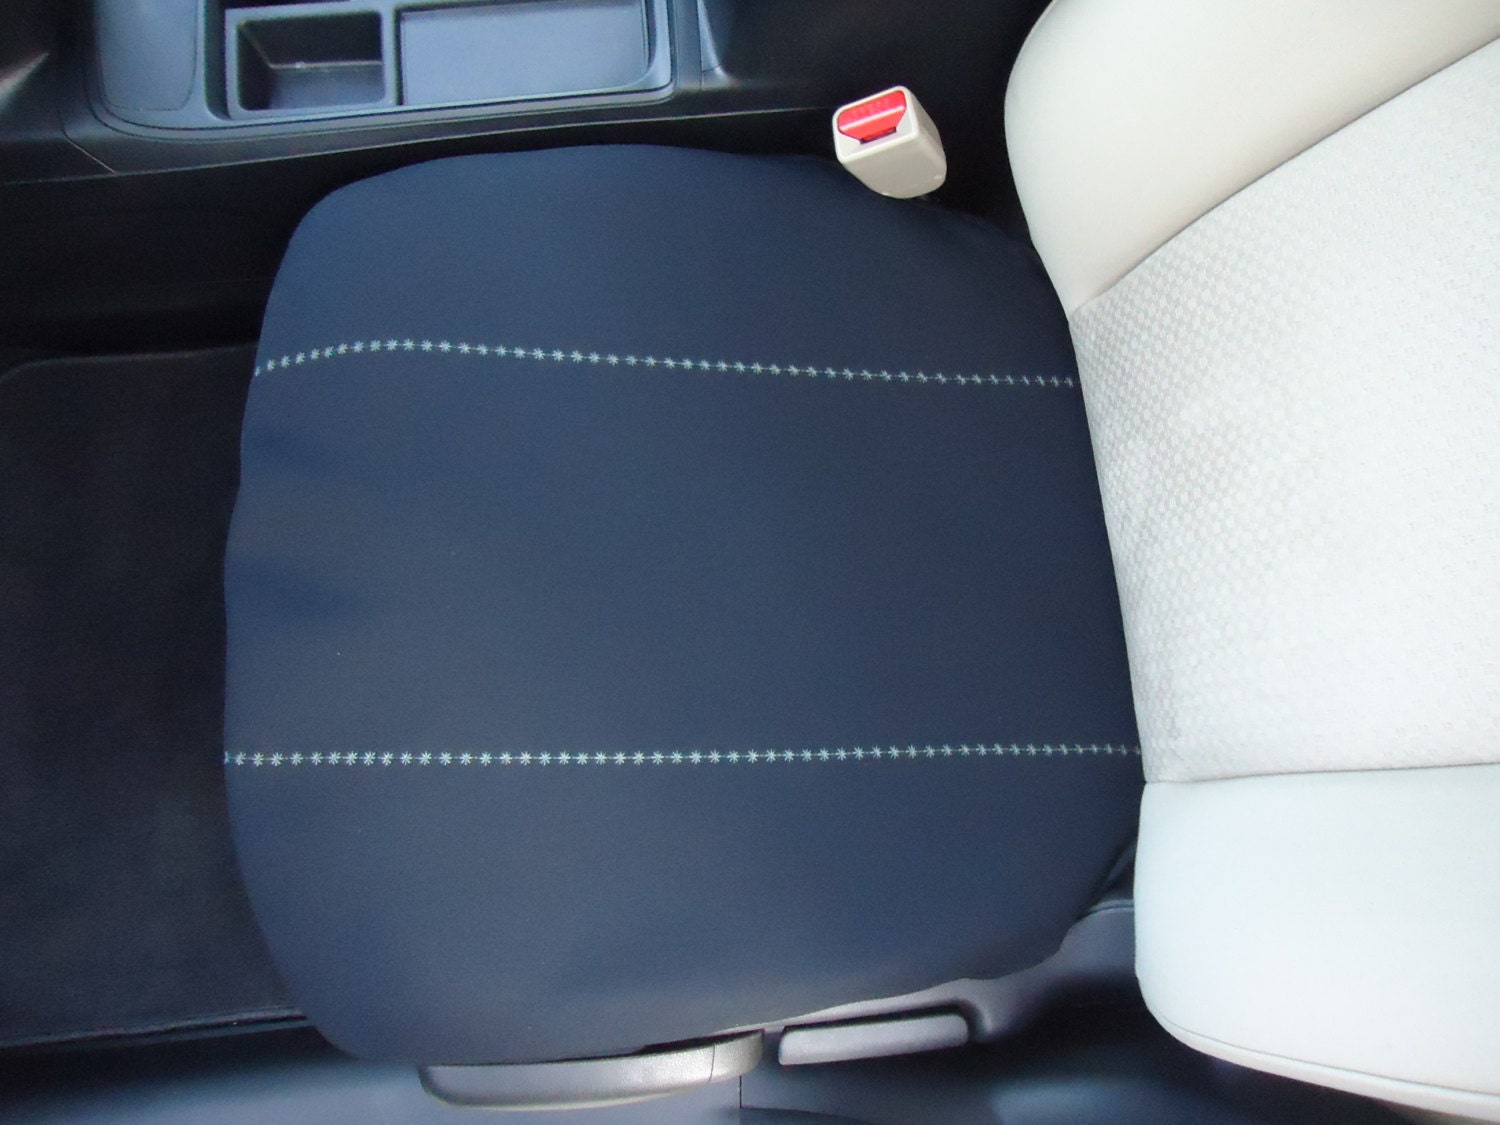 Neoprene Bottom Seat Covers With Stitching For All Ford, Chevy, Ram , & Toyota Trucks Suv's . This Price Is For One Cover Only